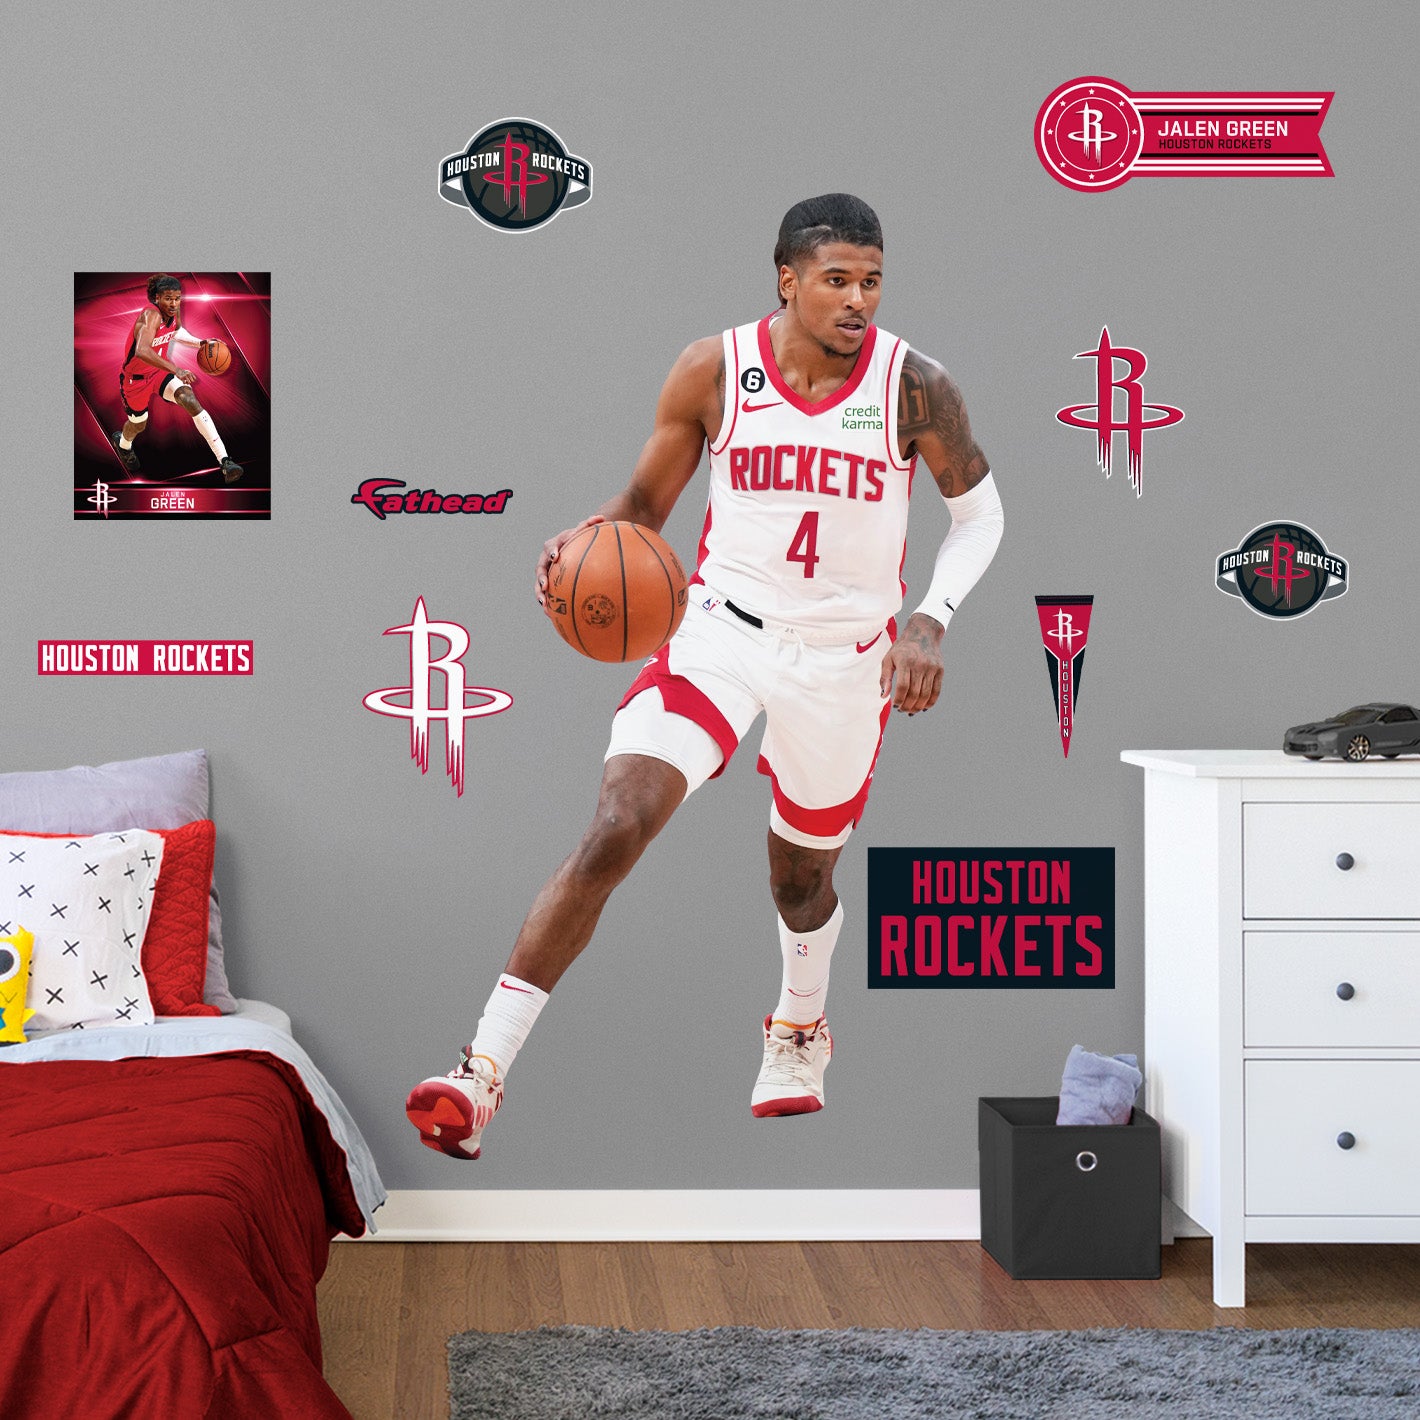 Houston Rockets: Jalen Green 2021 Icon Jersey - Officially